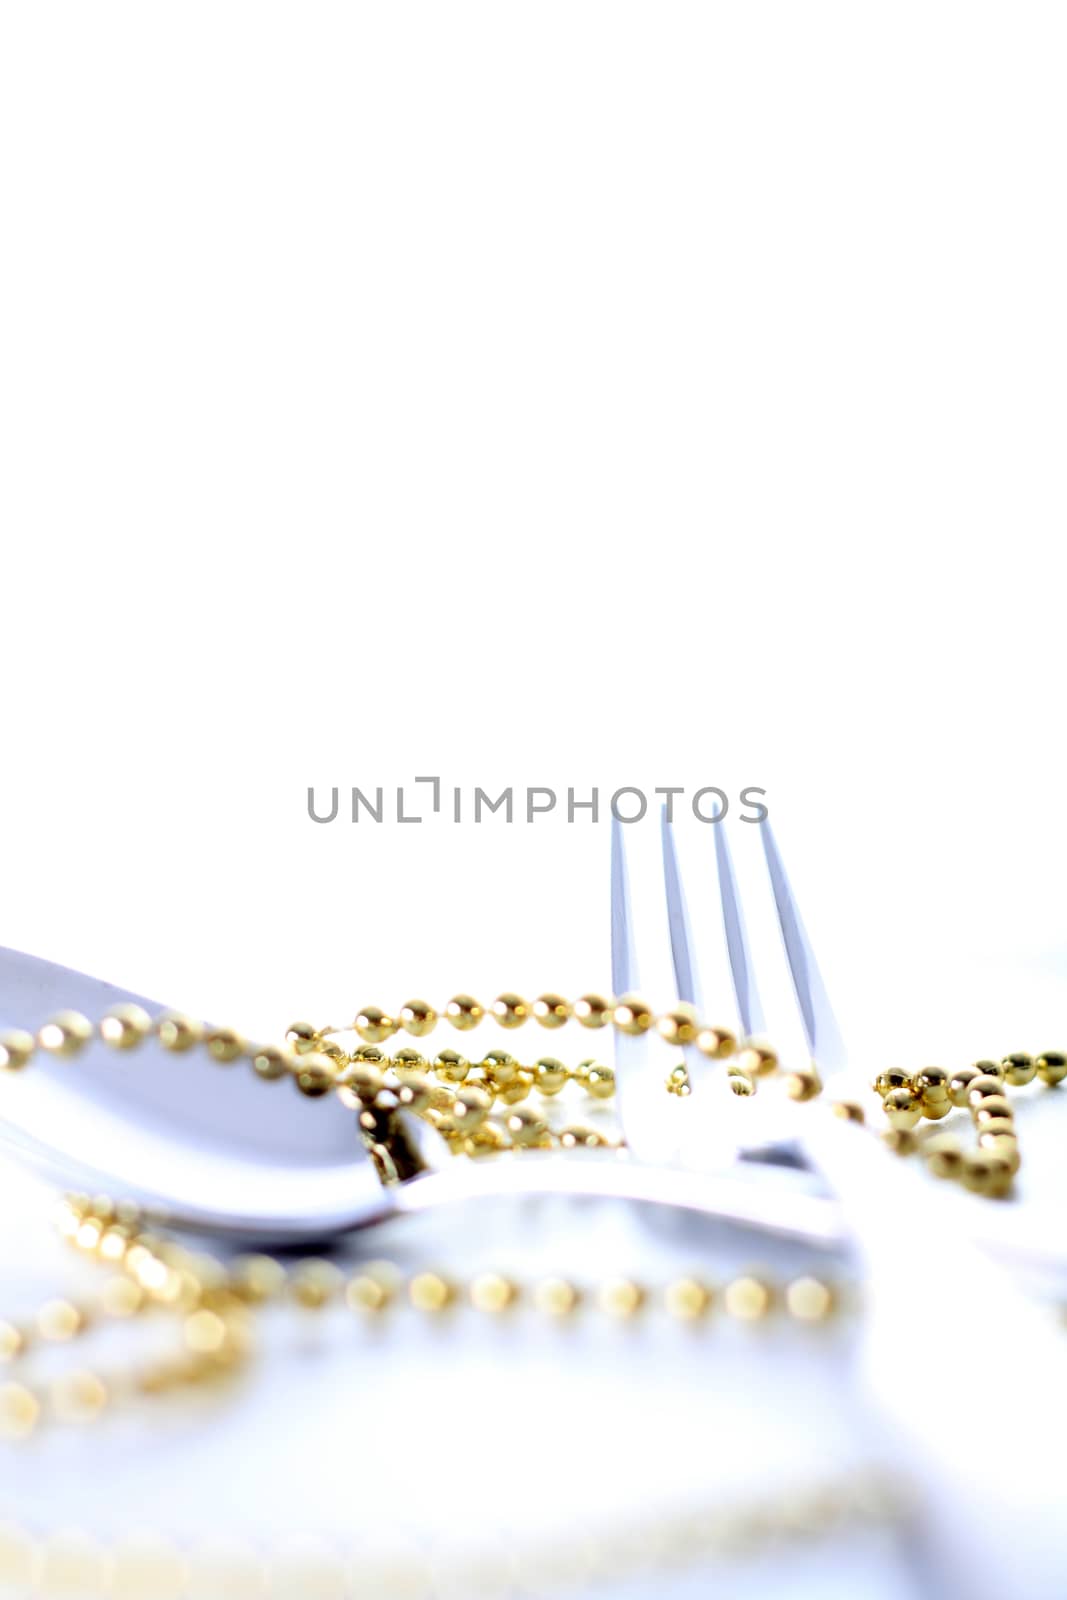 Cutlery, spoon and fork with decoration and white background 